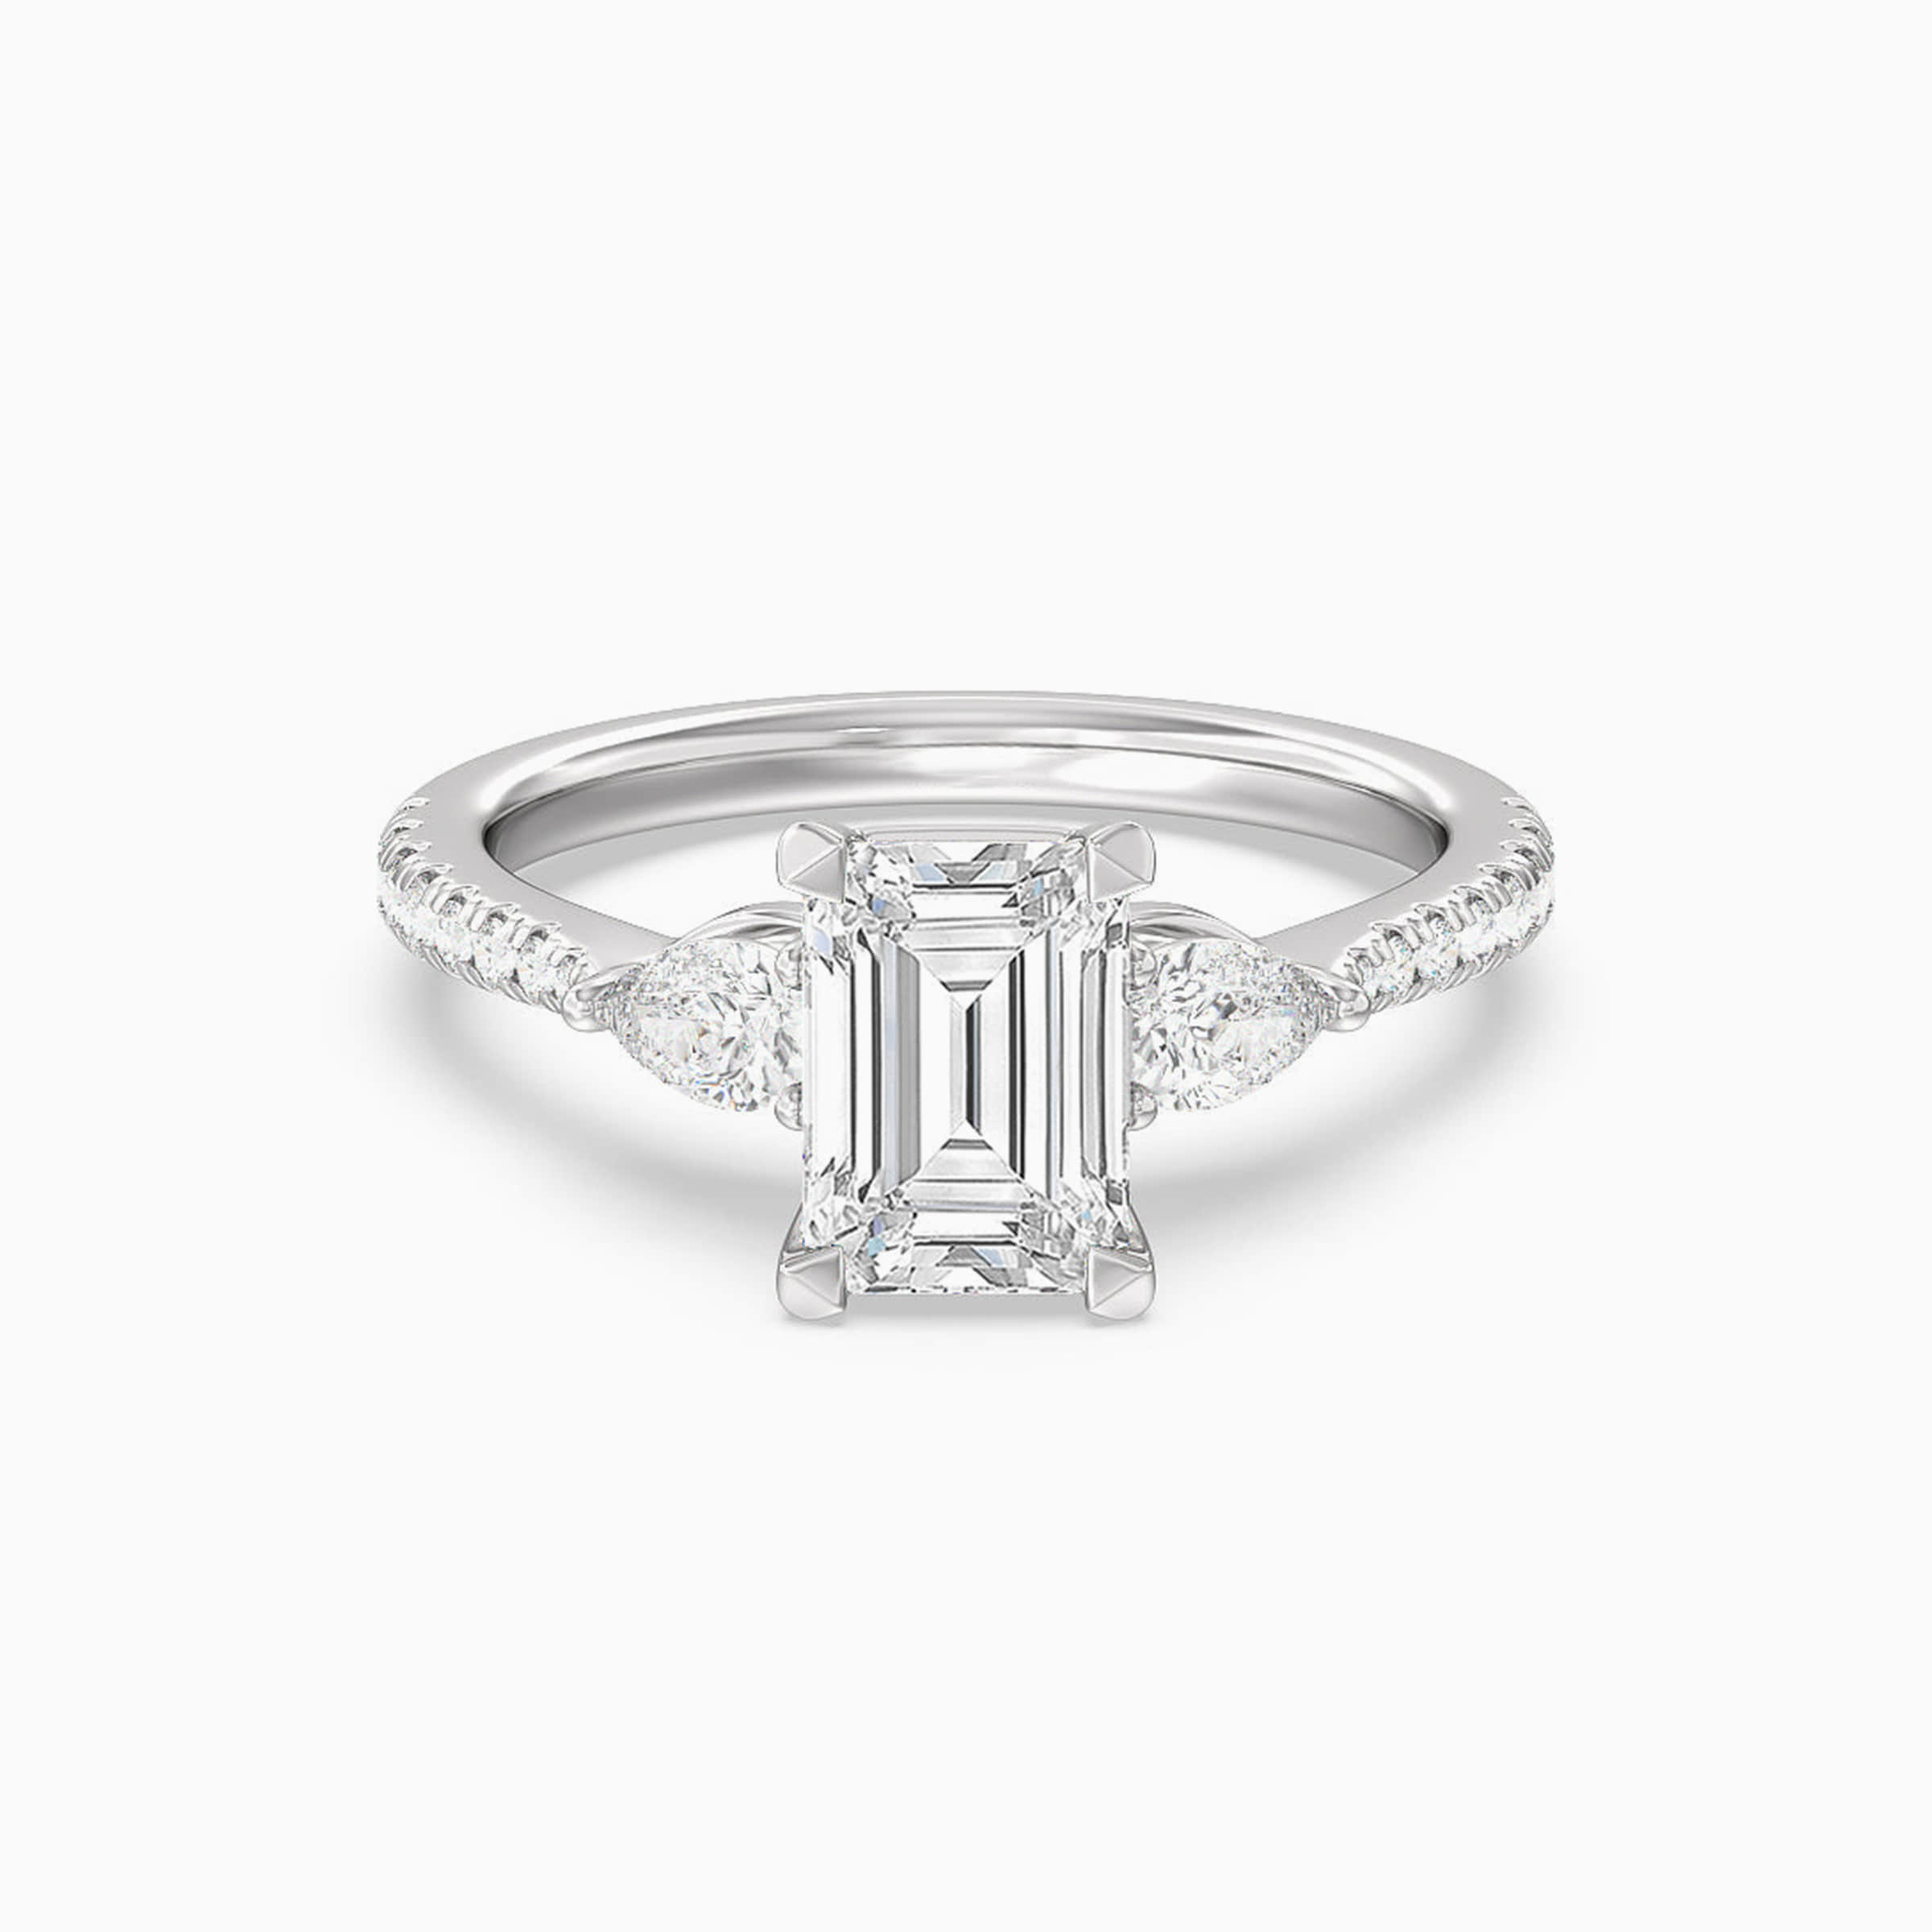 Darry Ring 3 stone emerald cut promise ring in white gold